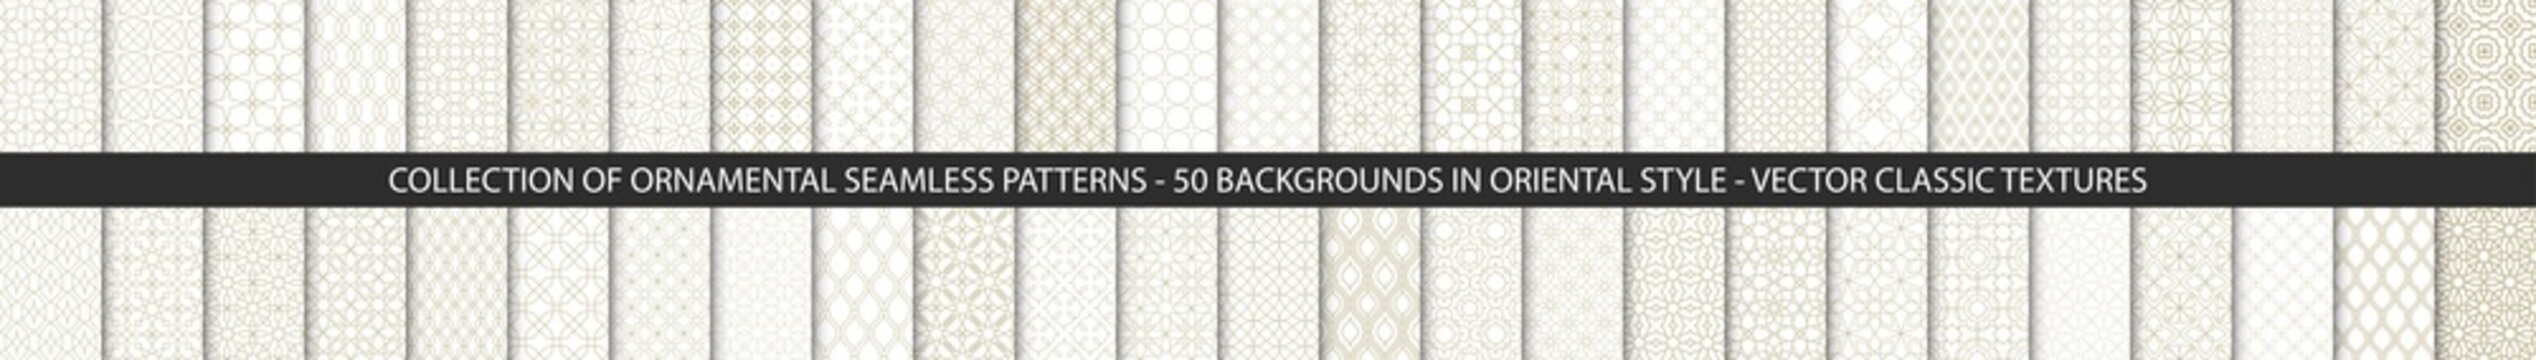 Super Big set of 50 oriental patterns. White and gold background with Arabic ornaments. Patterns, backgrounds and wallpapers for your design. Textile ornament. Vector illustration.